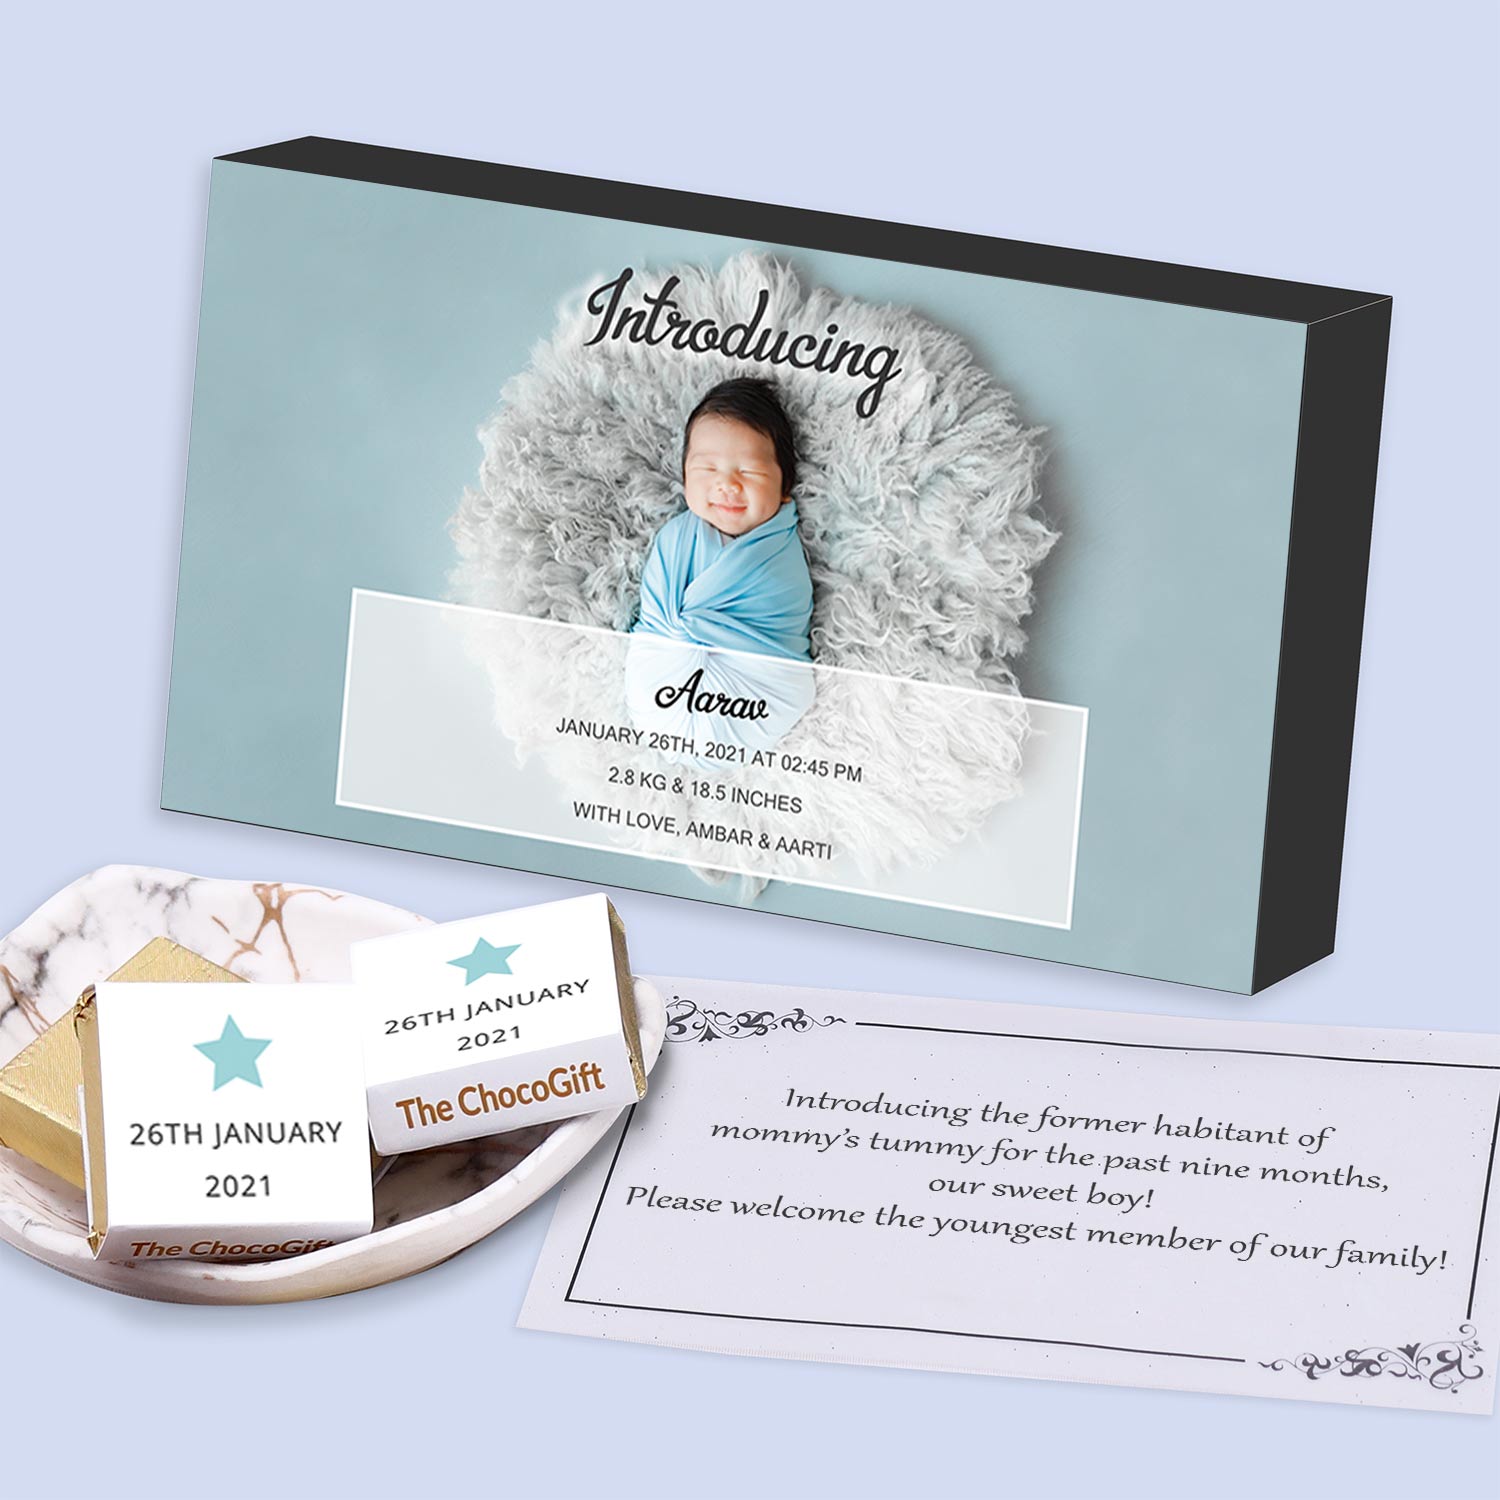 Star printed wrapped chocolates baby announcement gift